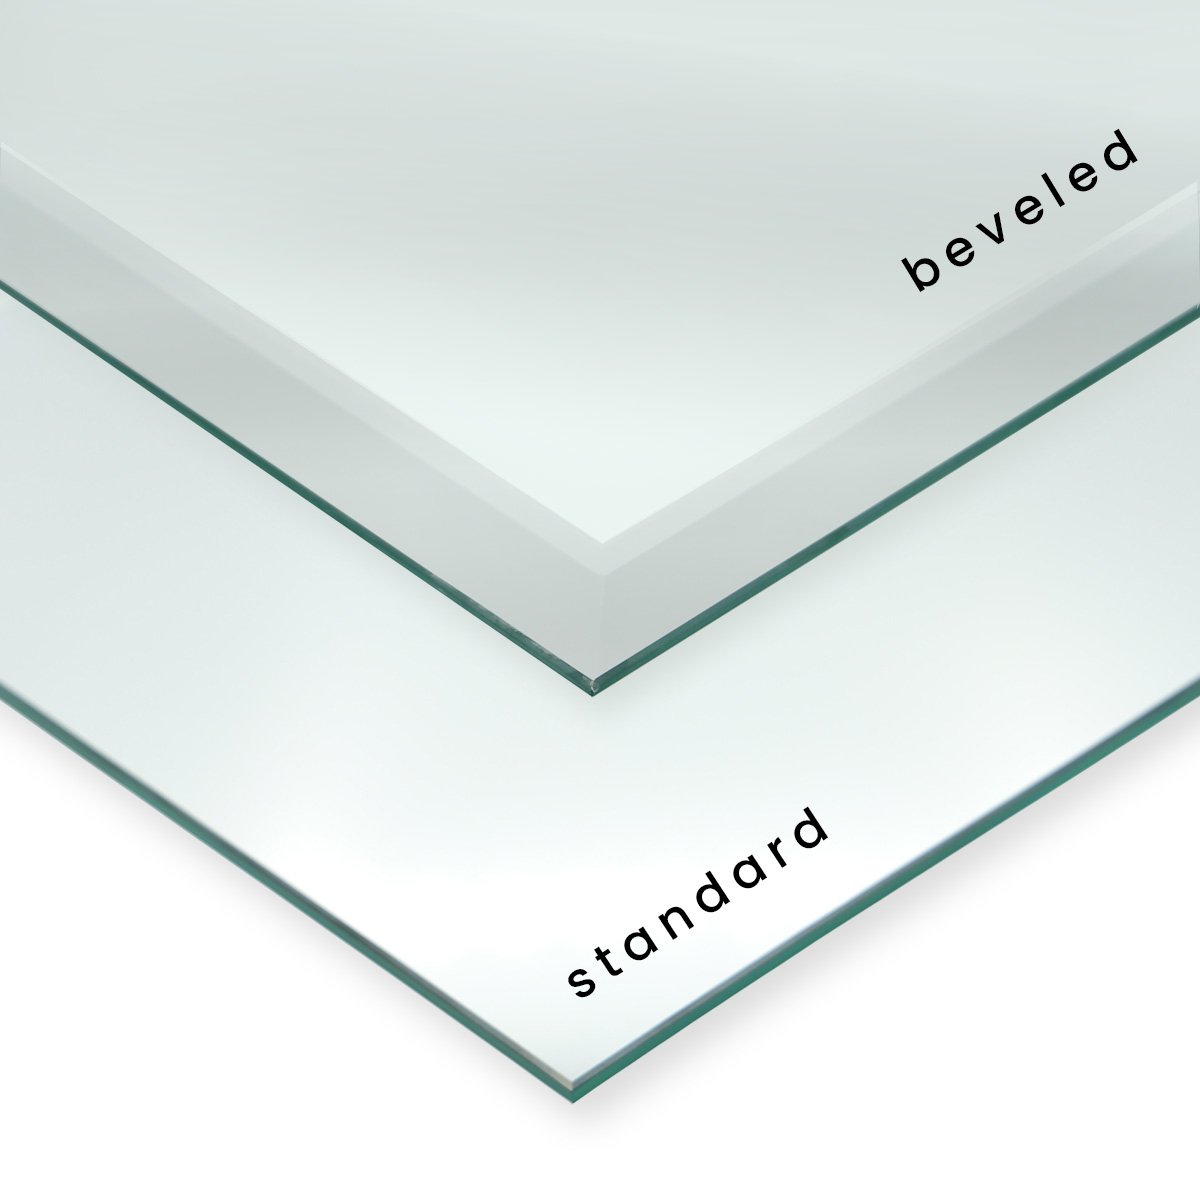 Photo showing beveled versus straight cut glass Hall of Frames